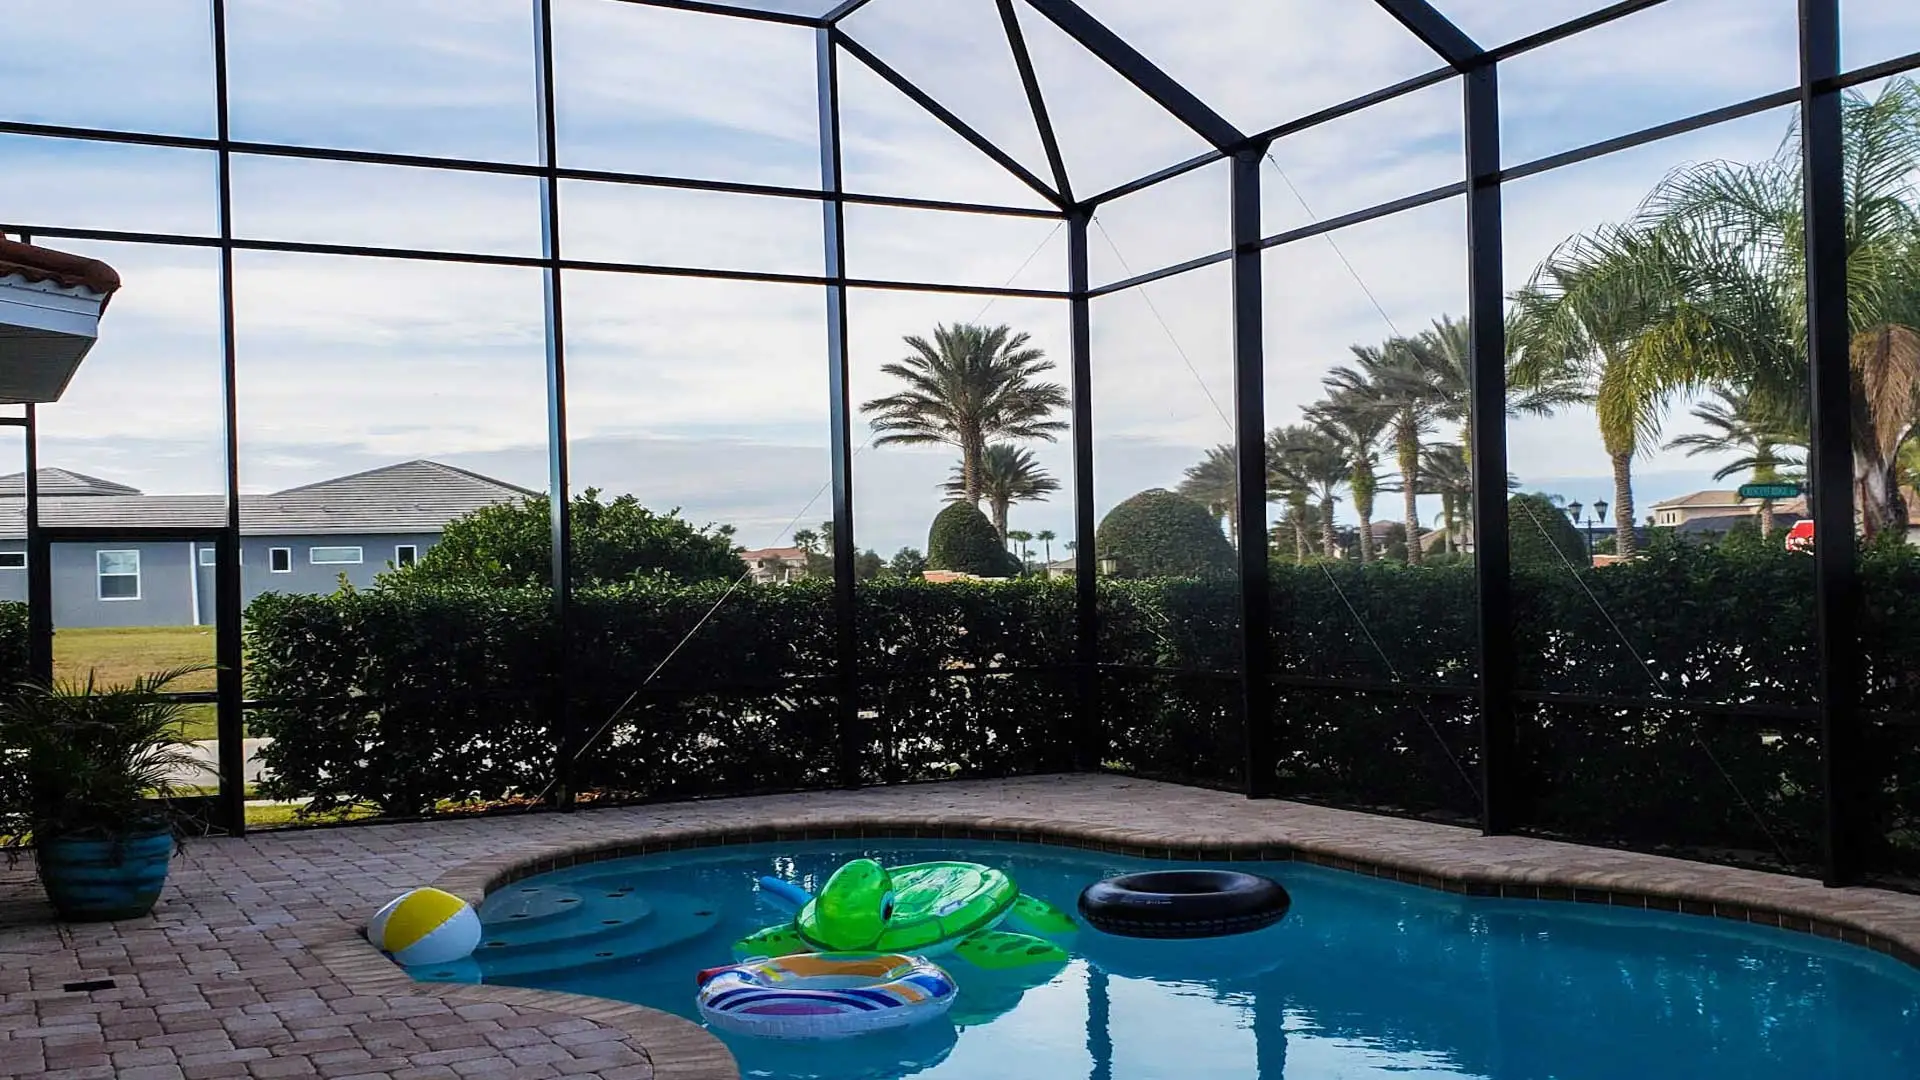 What Are the Differences Between a Florida Sunroom, Lanai, & Pool Cage?